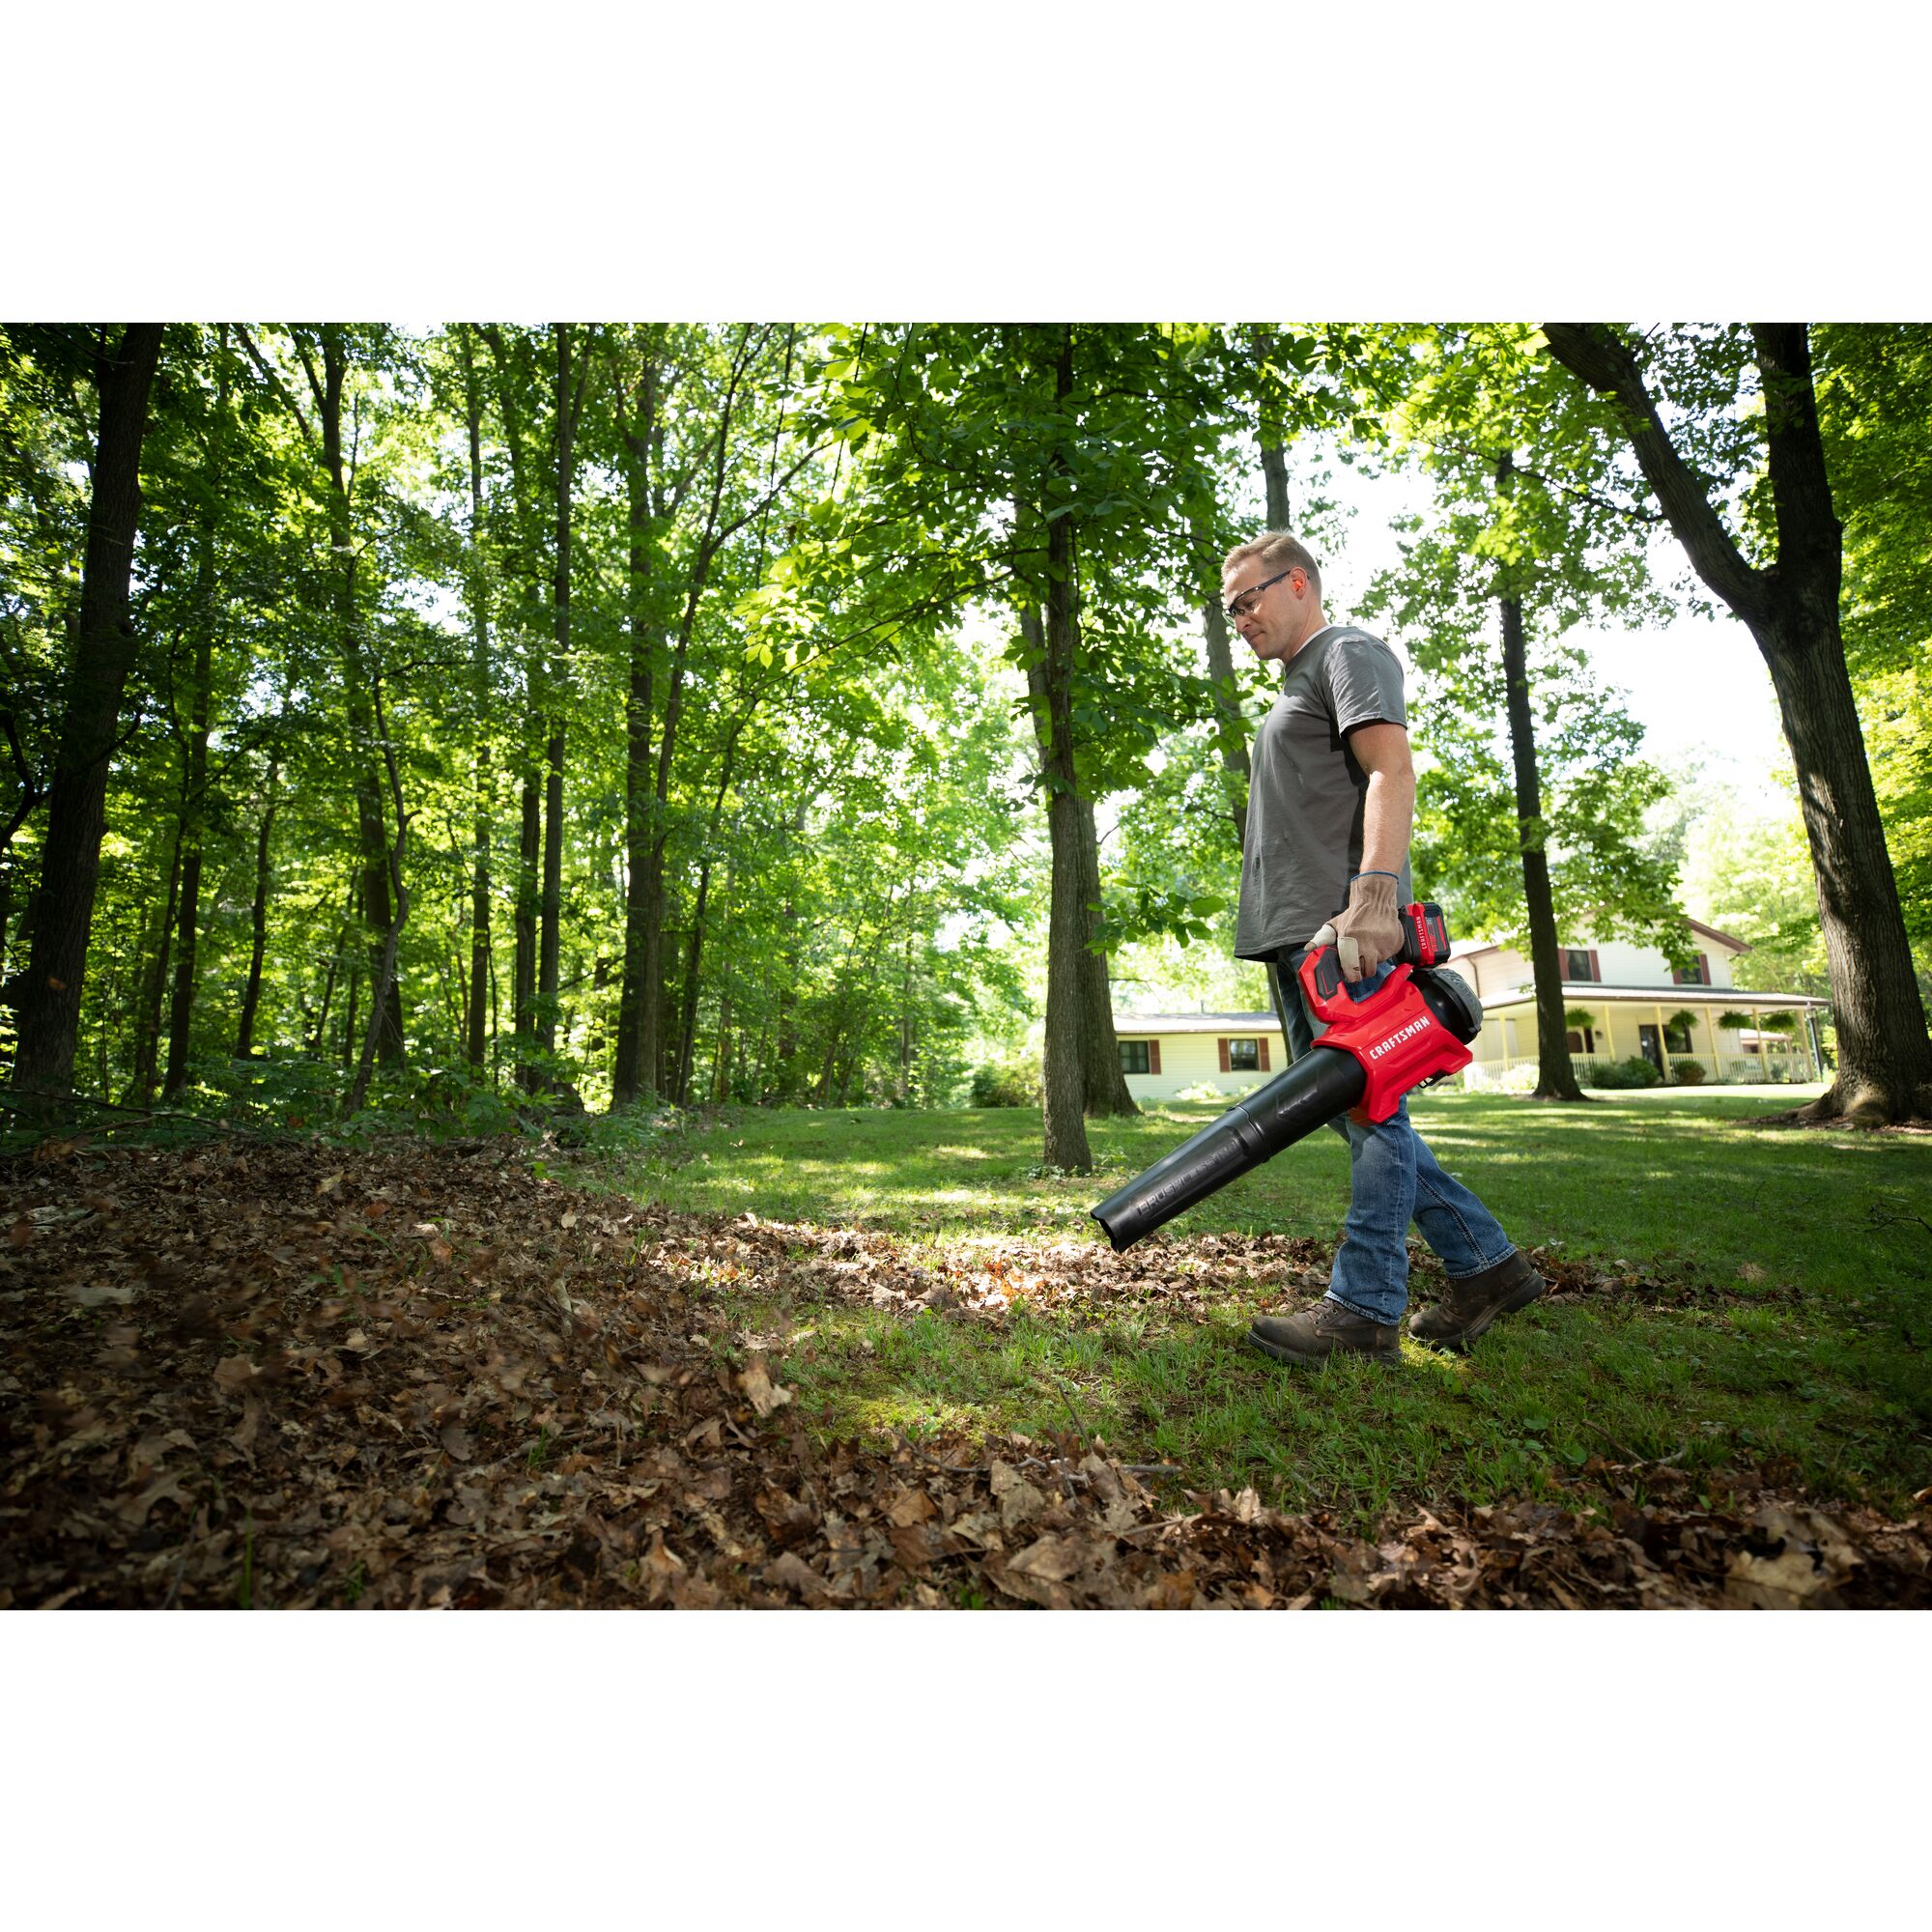 CRAFTSMAN V20 BRUSHLESSRP Blower clearing leaves off grass in a wooded area with tree coverage